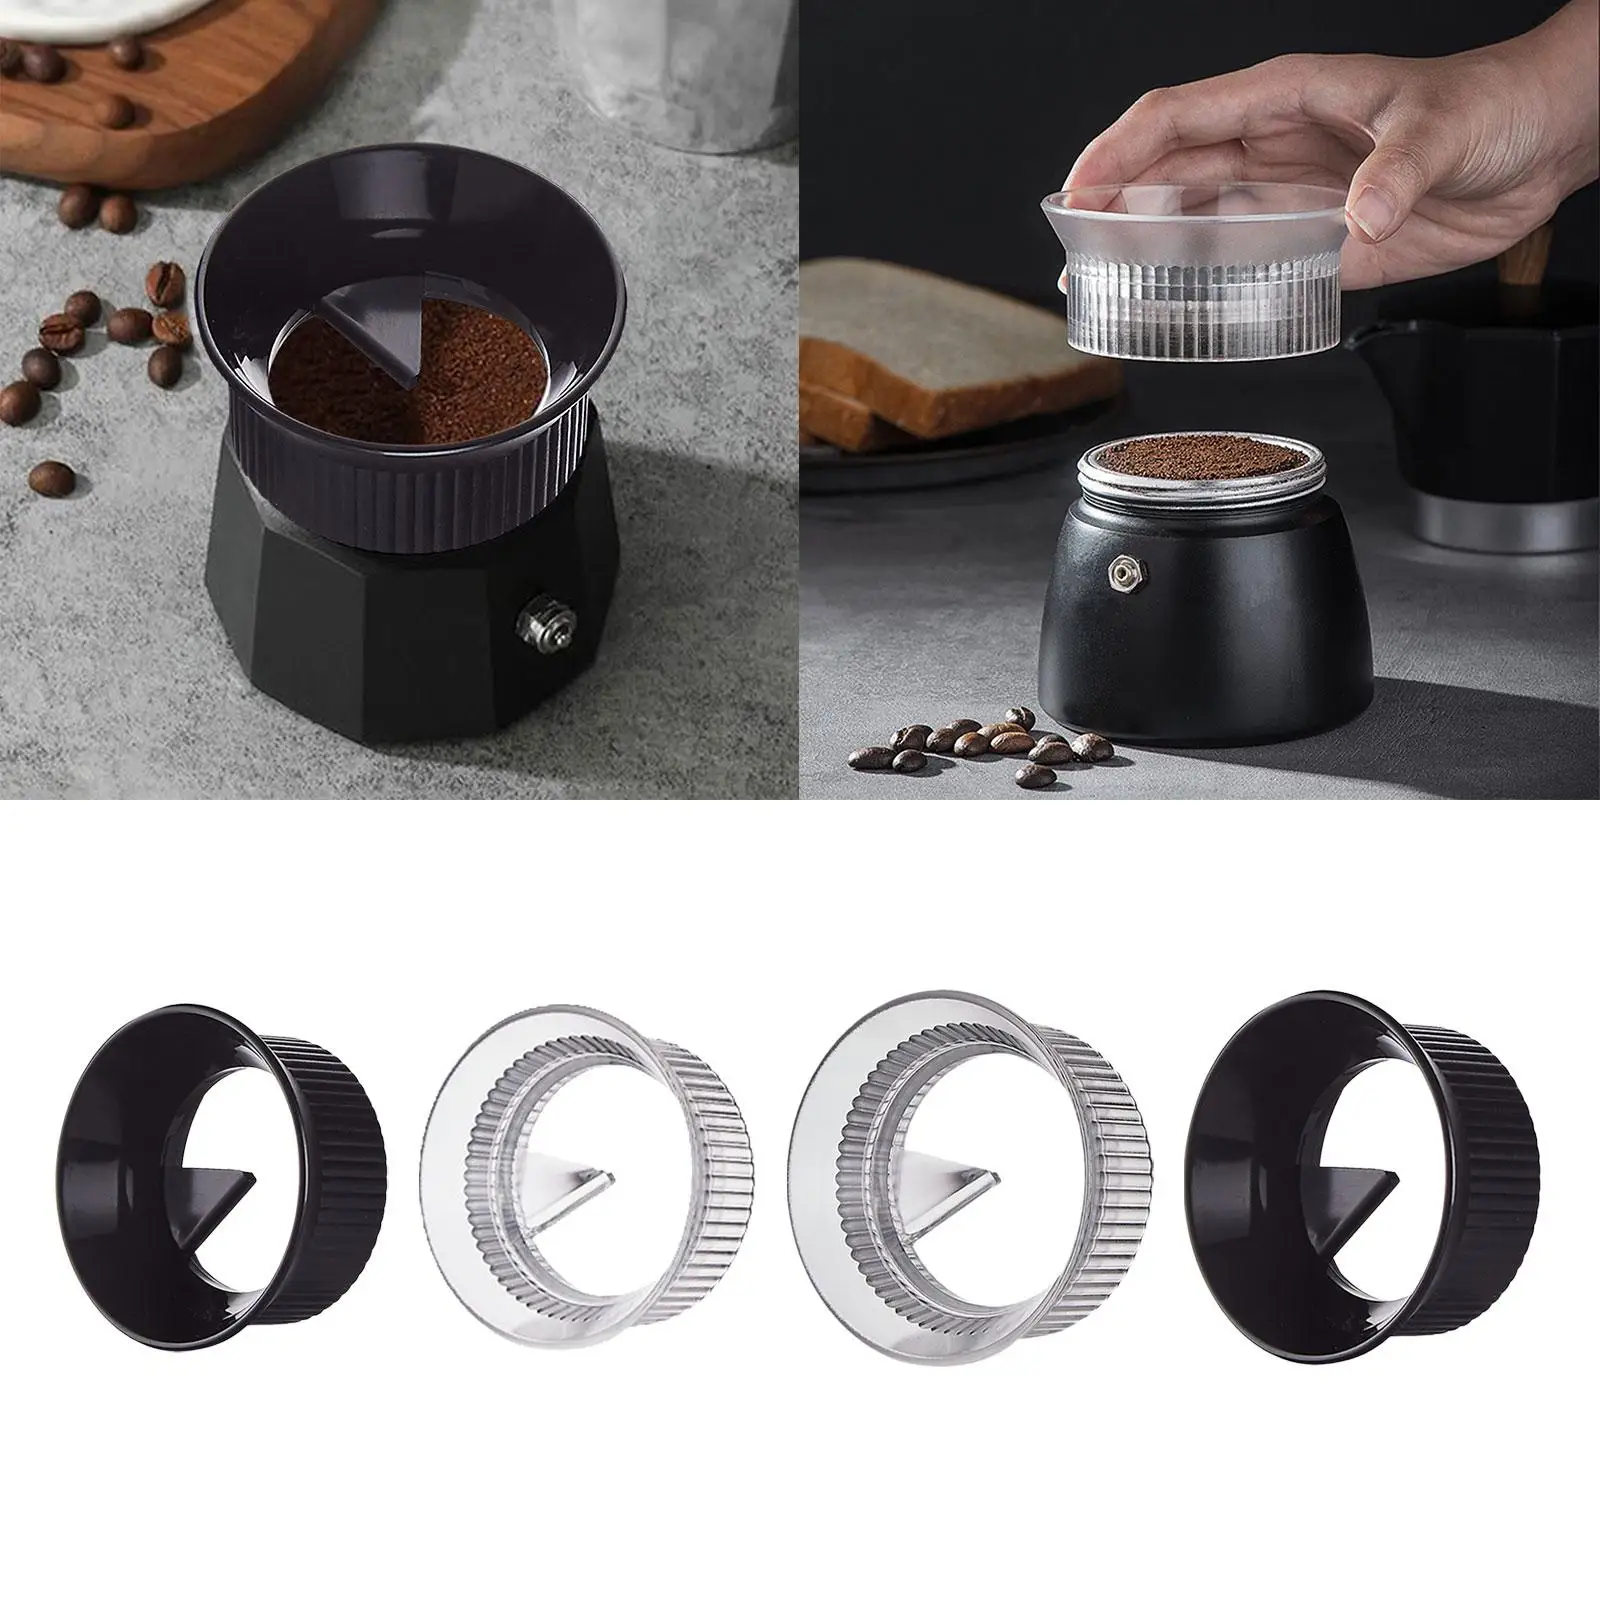 Coffee Powder Receiving Ring, Espresso Dosing Funnel Accessory, Replaces Powder Dosing Rings for Barista